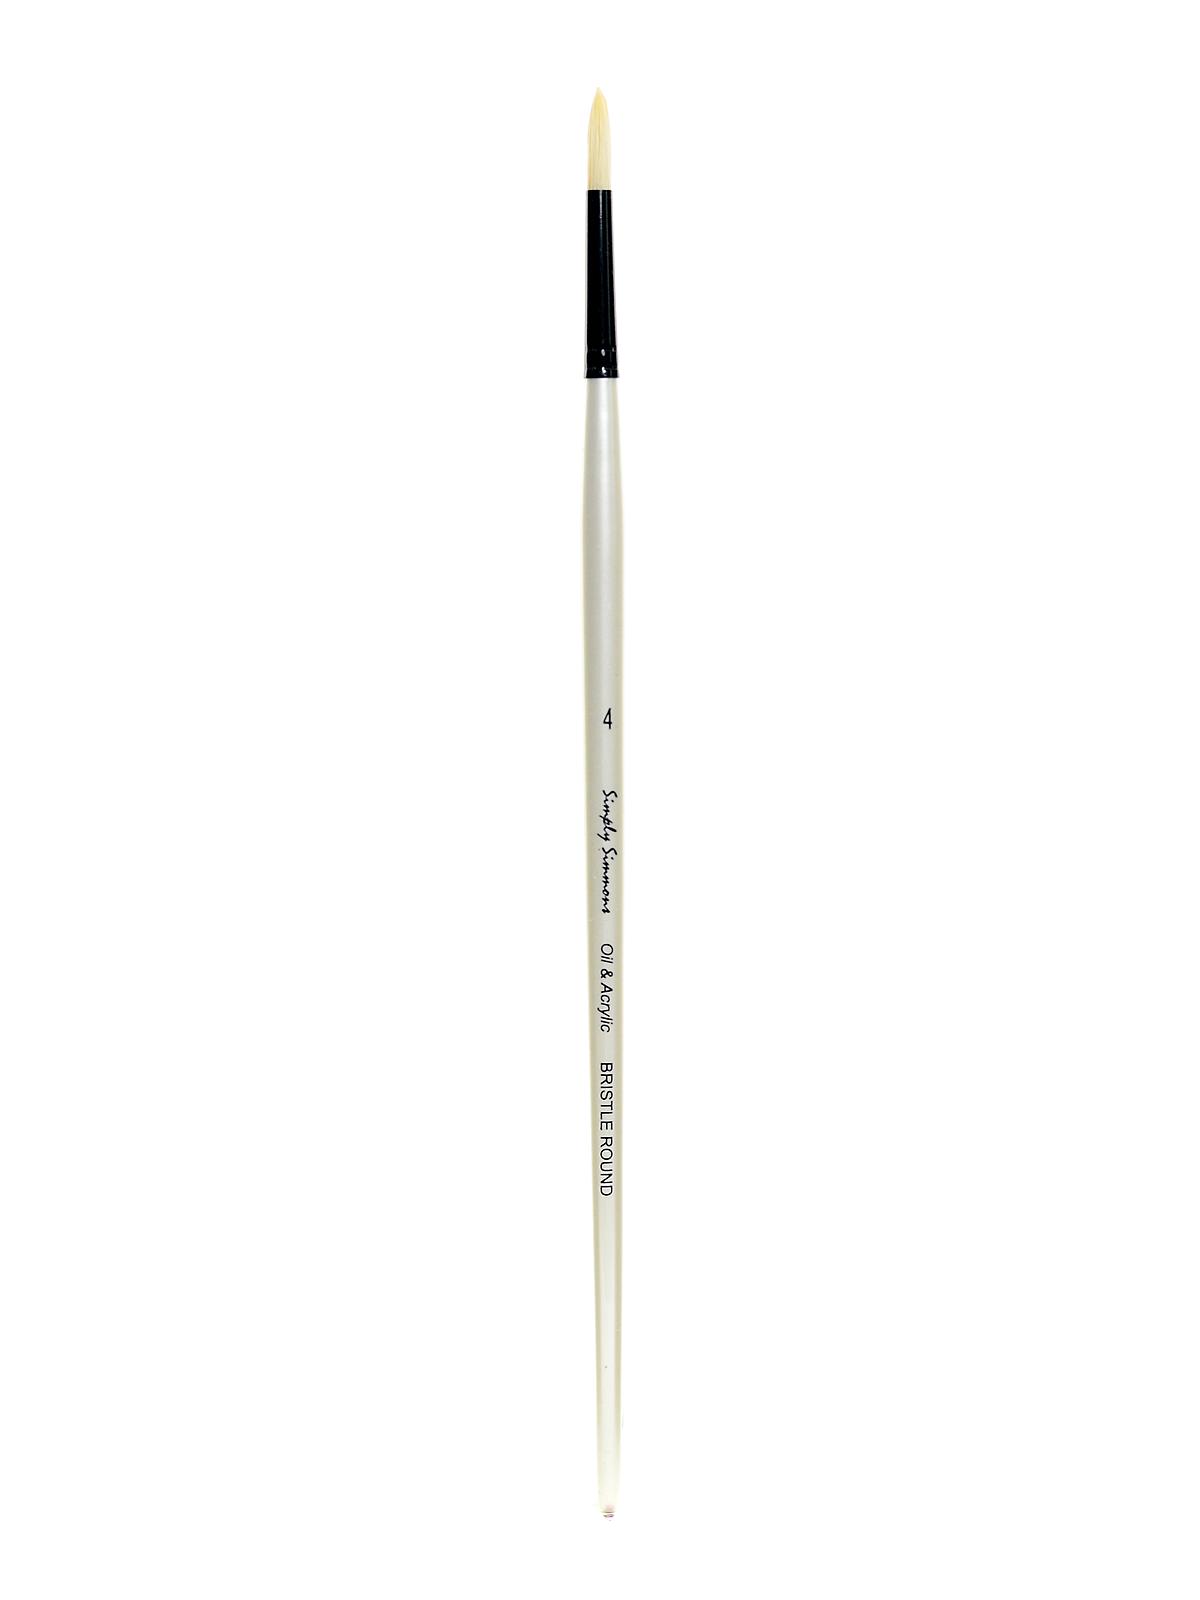 Simply Simmons Long Handle Brushes 4 Bristle Round